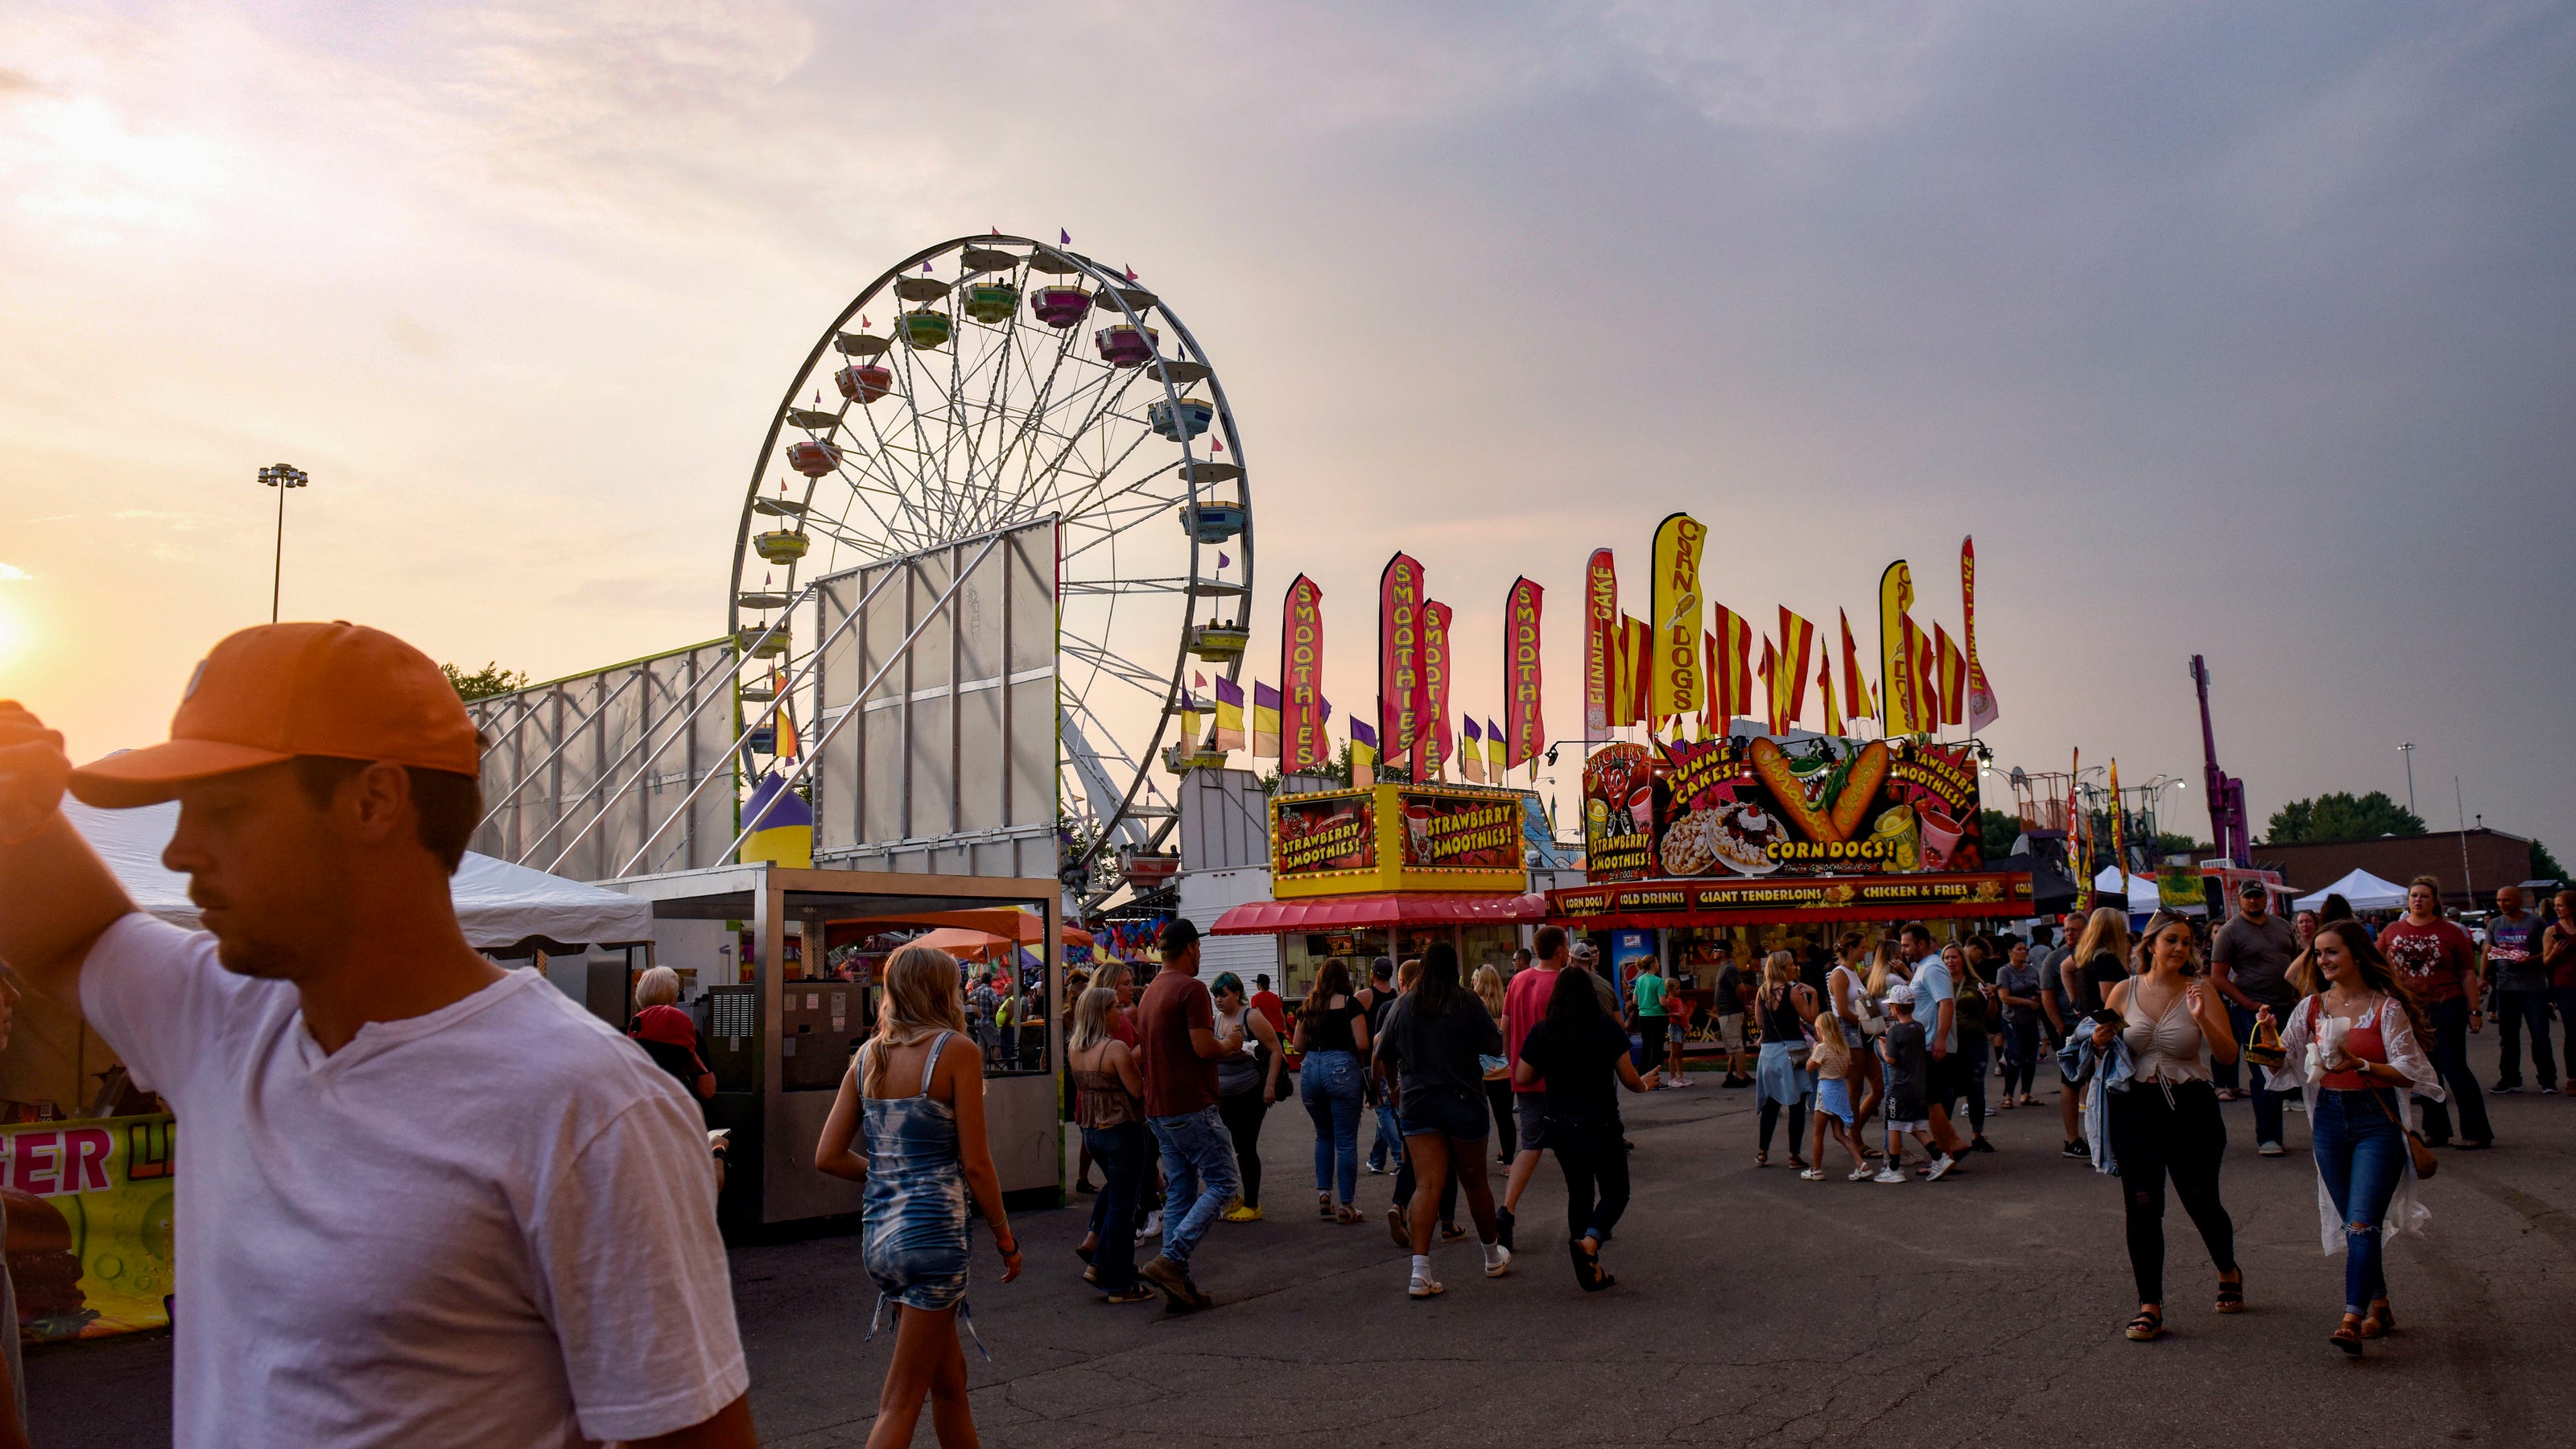 Here are the events and concert schedule for the Sioux Empire Fair